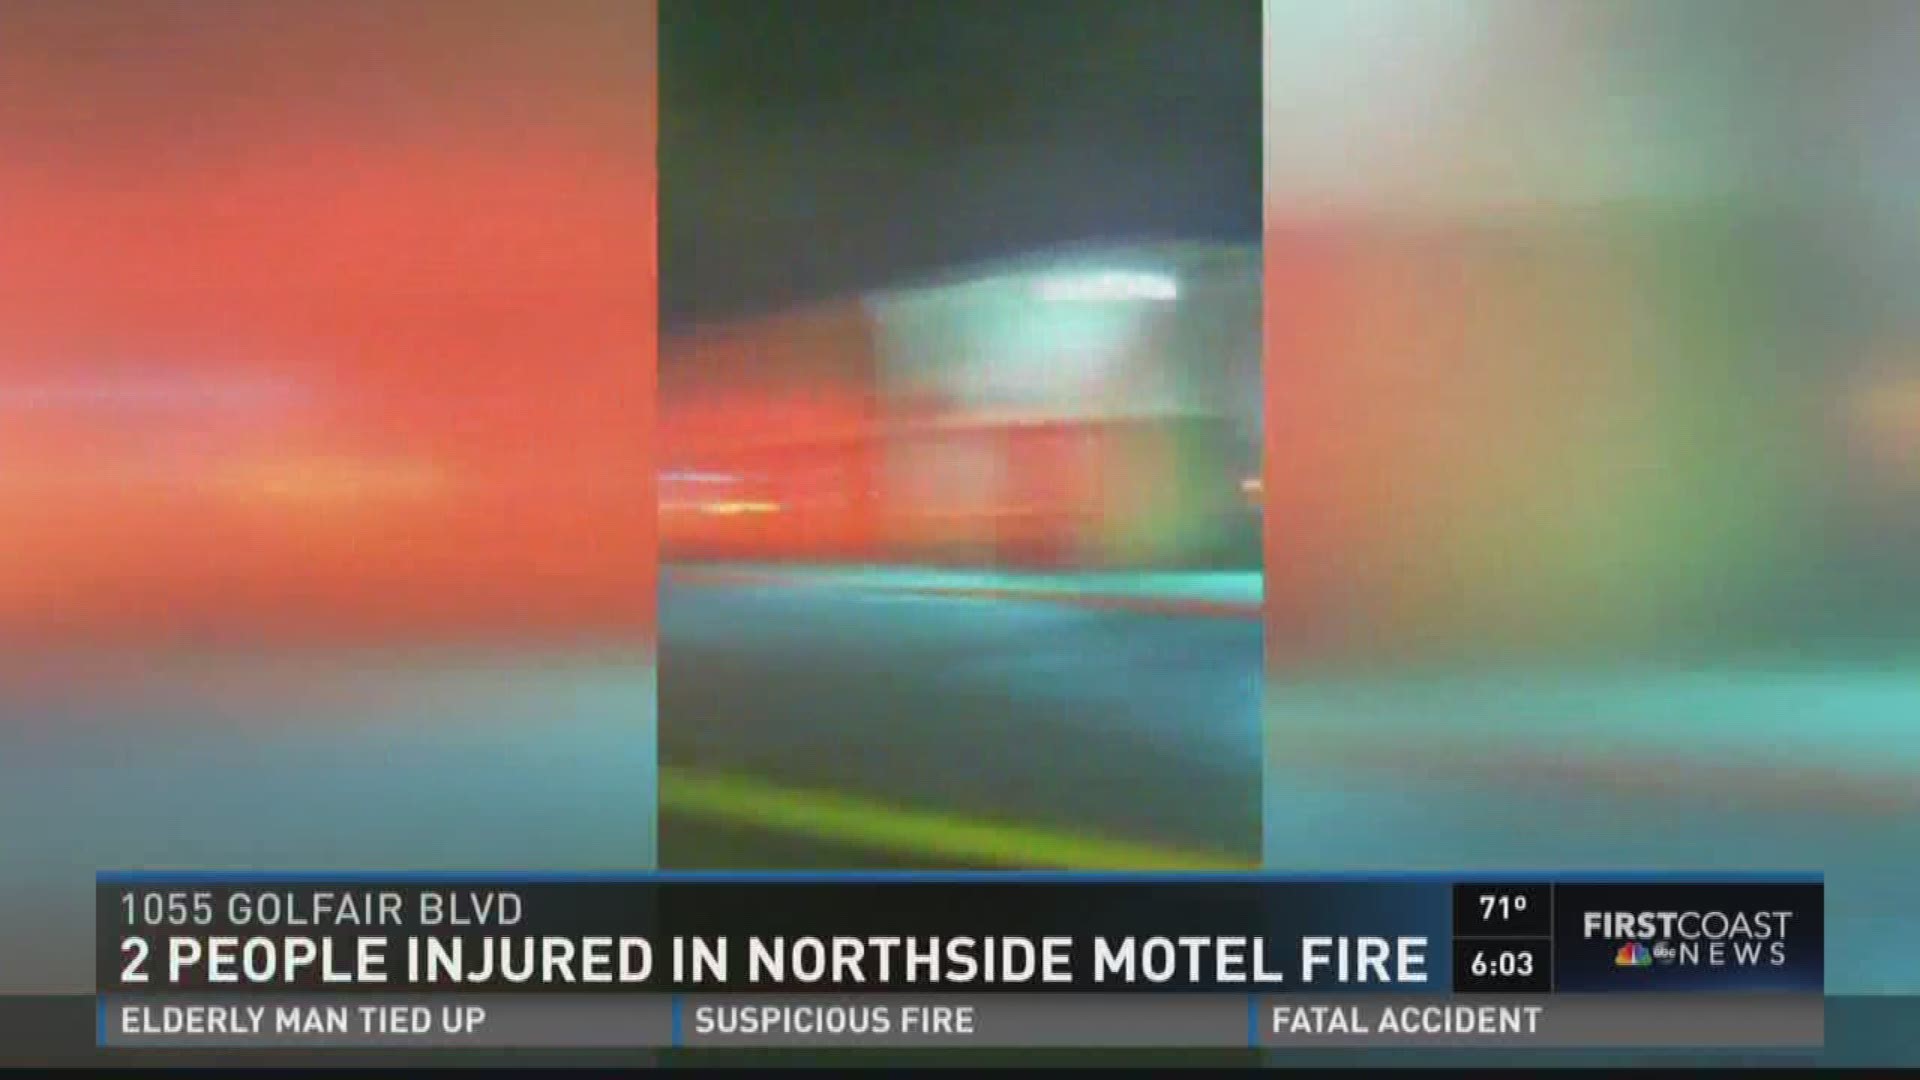 2 people injured in Northside motel fire picture